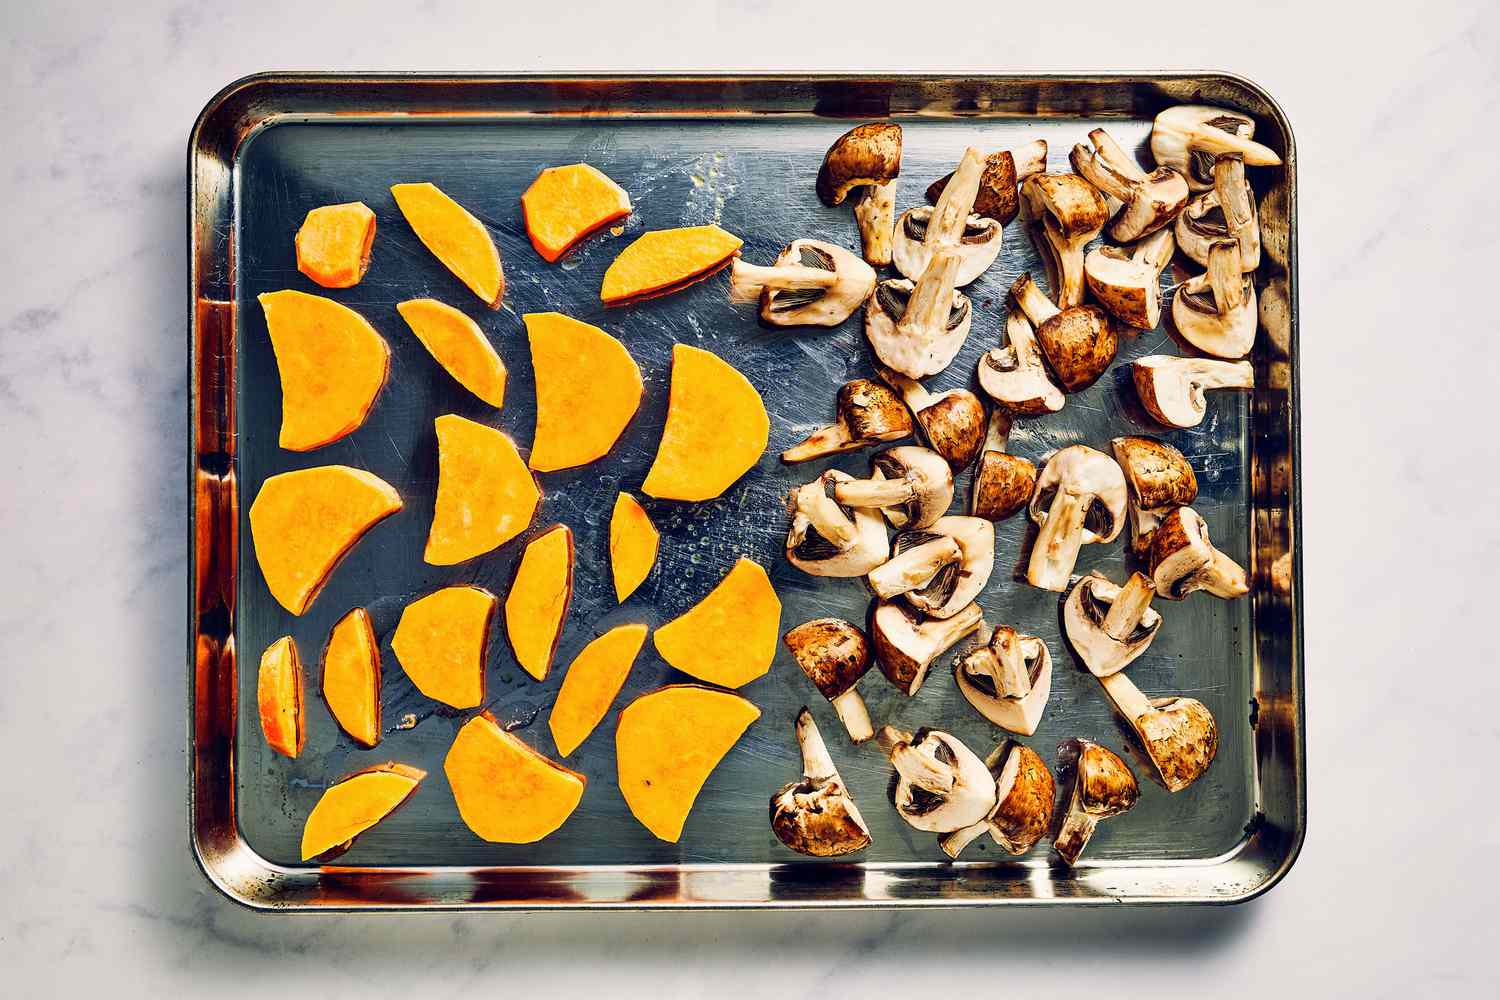 A sheet pan with one side with sliced half moon sweet potato pieces, tossed in oil and seasoned with salt, and the other half with cremini mushrooms tossed in oil and seasoned with salt